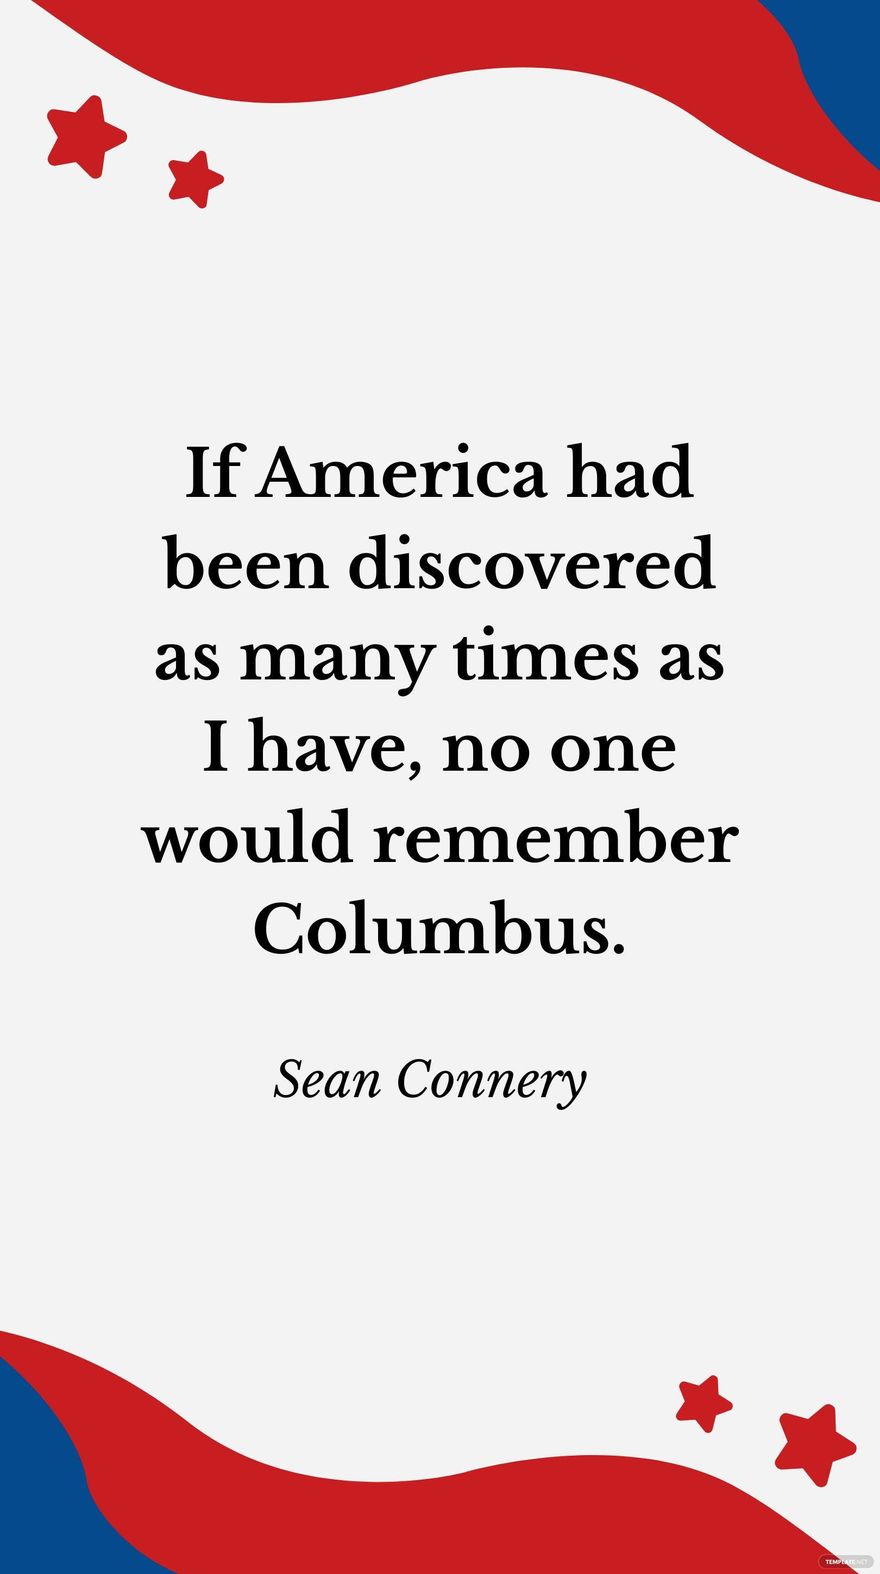 Sean Connery- If America had been discovered as many times as I have, no one would remember Columbus.